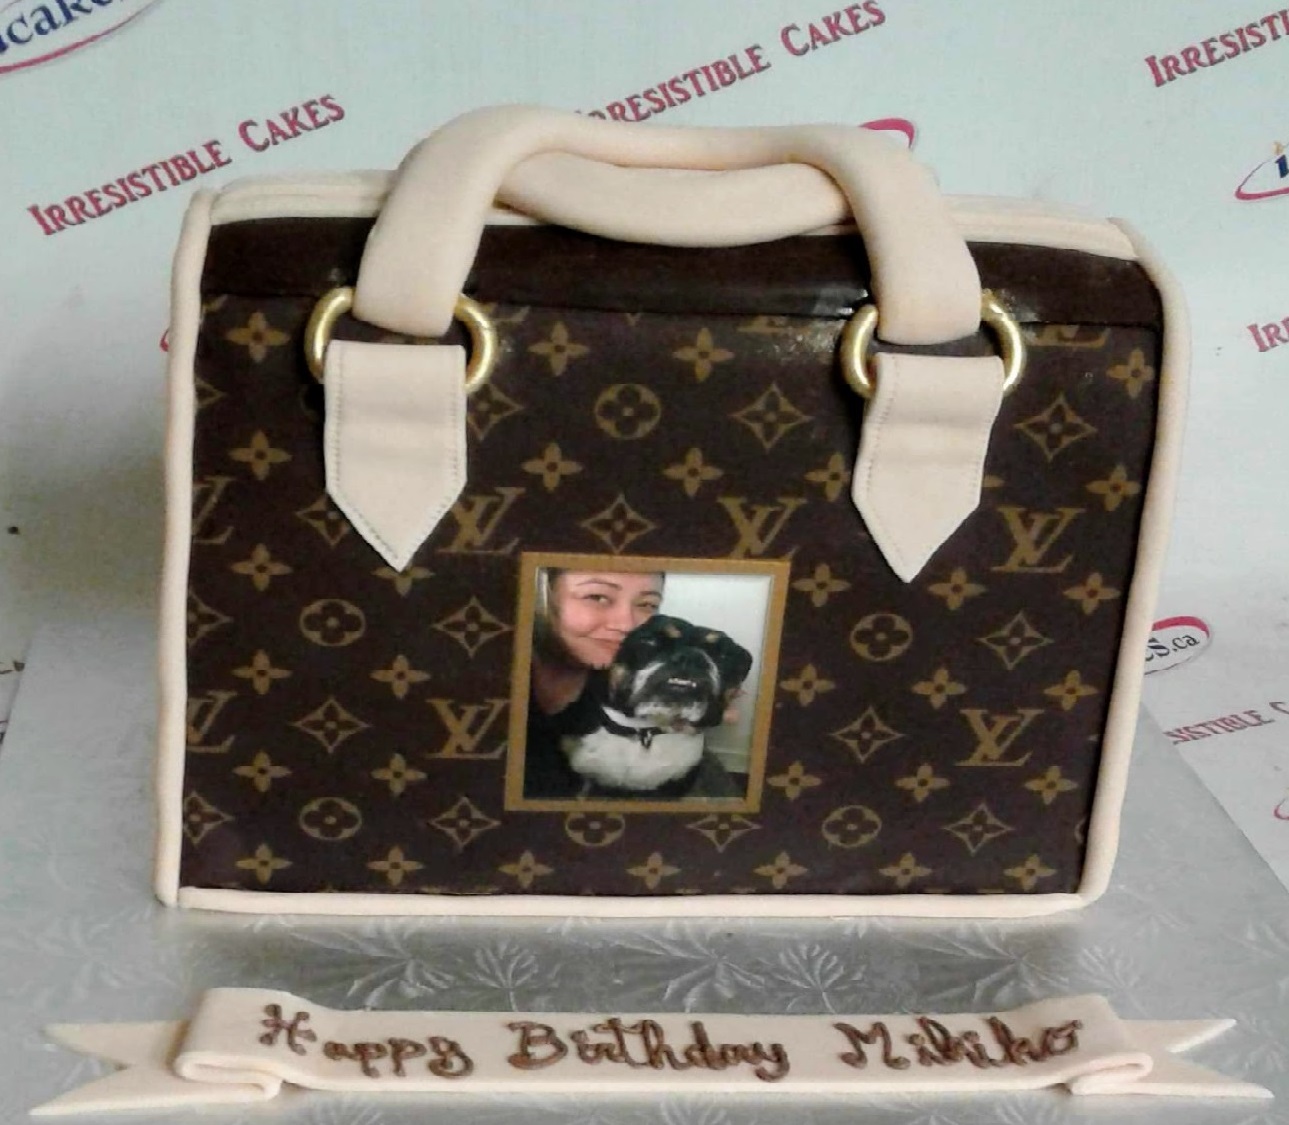 Karina's Creative Designs - Louis Vuitton inspired birthday cake. Turned  out gorgeous 😍 Happy birthday Brianna.